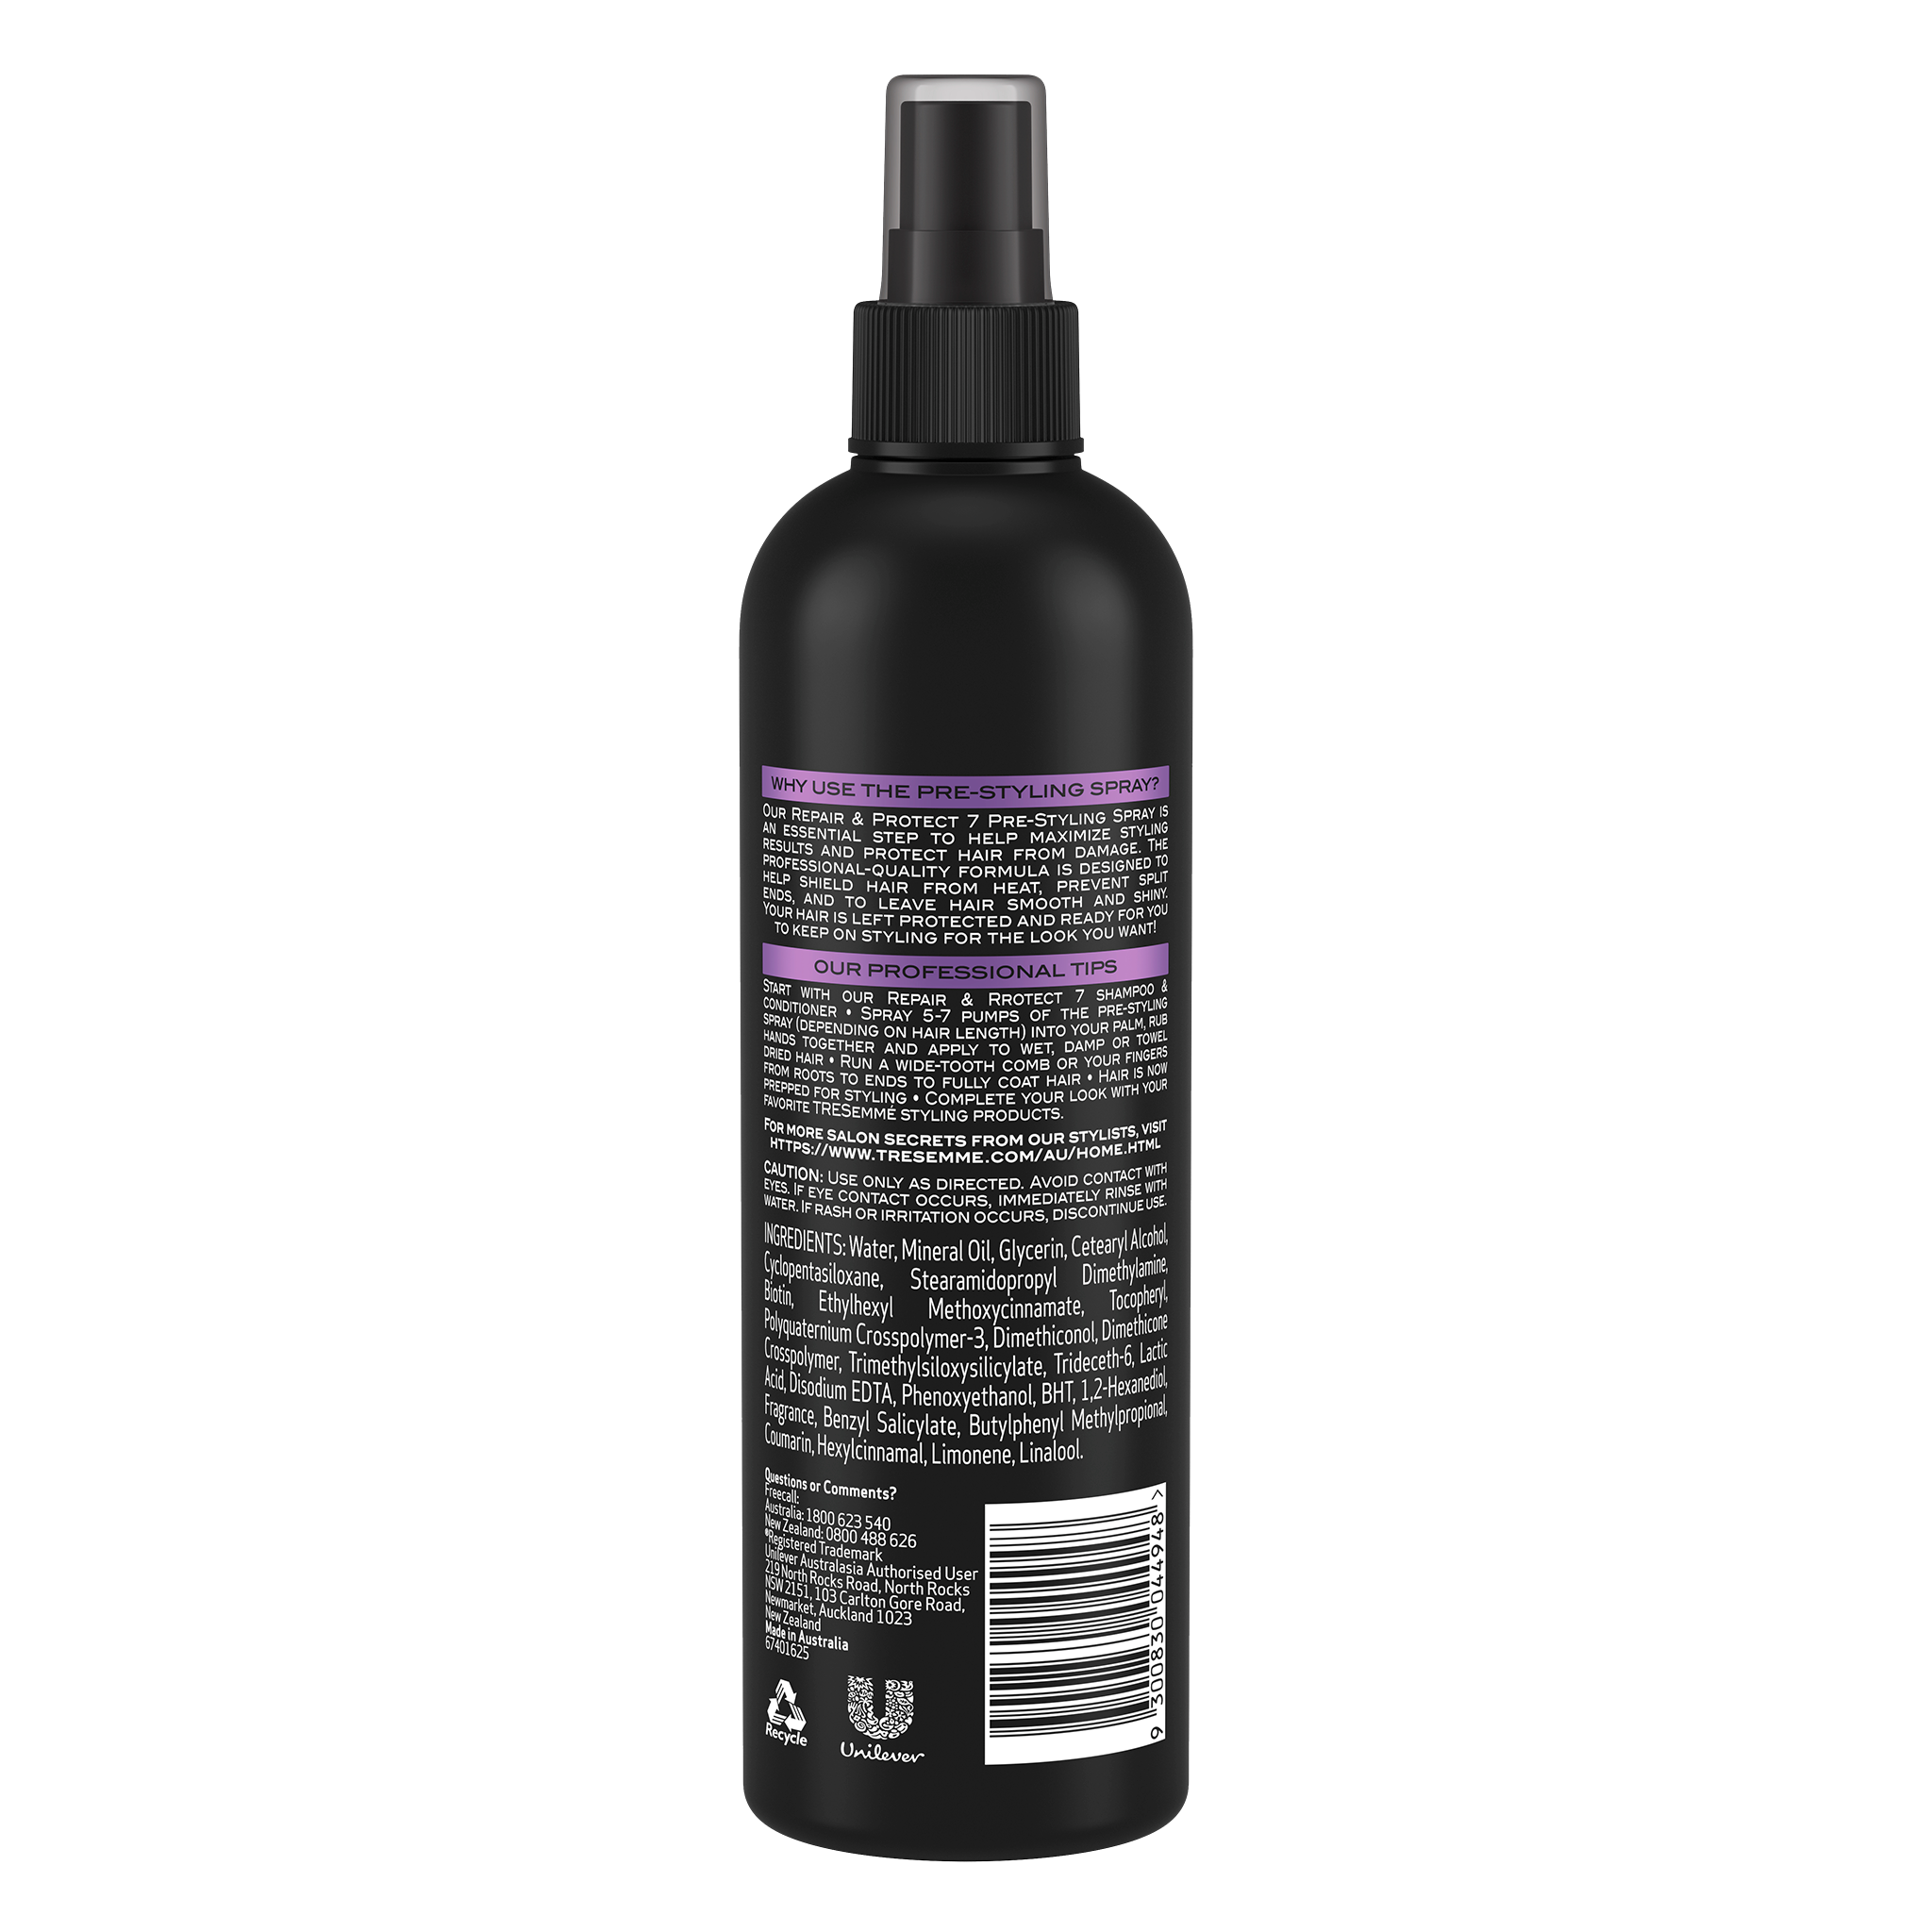 Repair & Protect 7 Pre-styling Spray